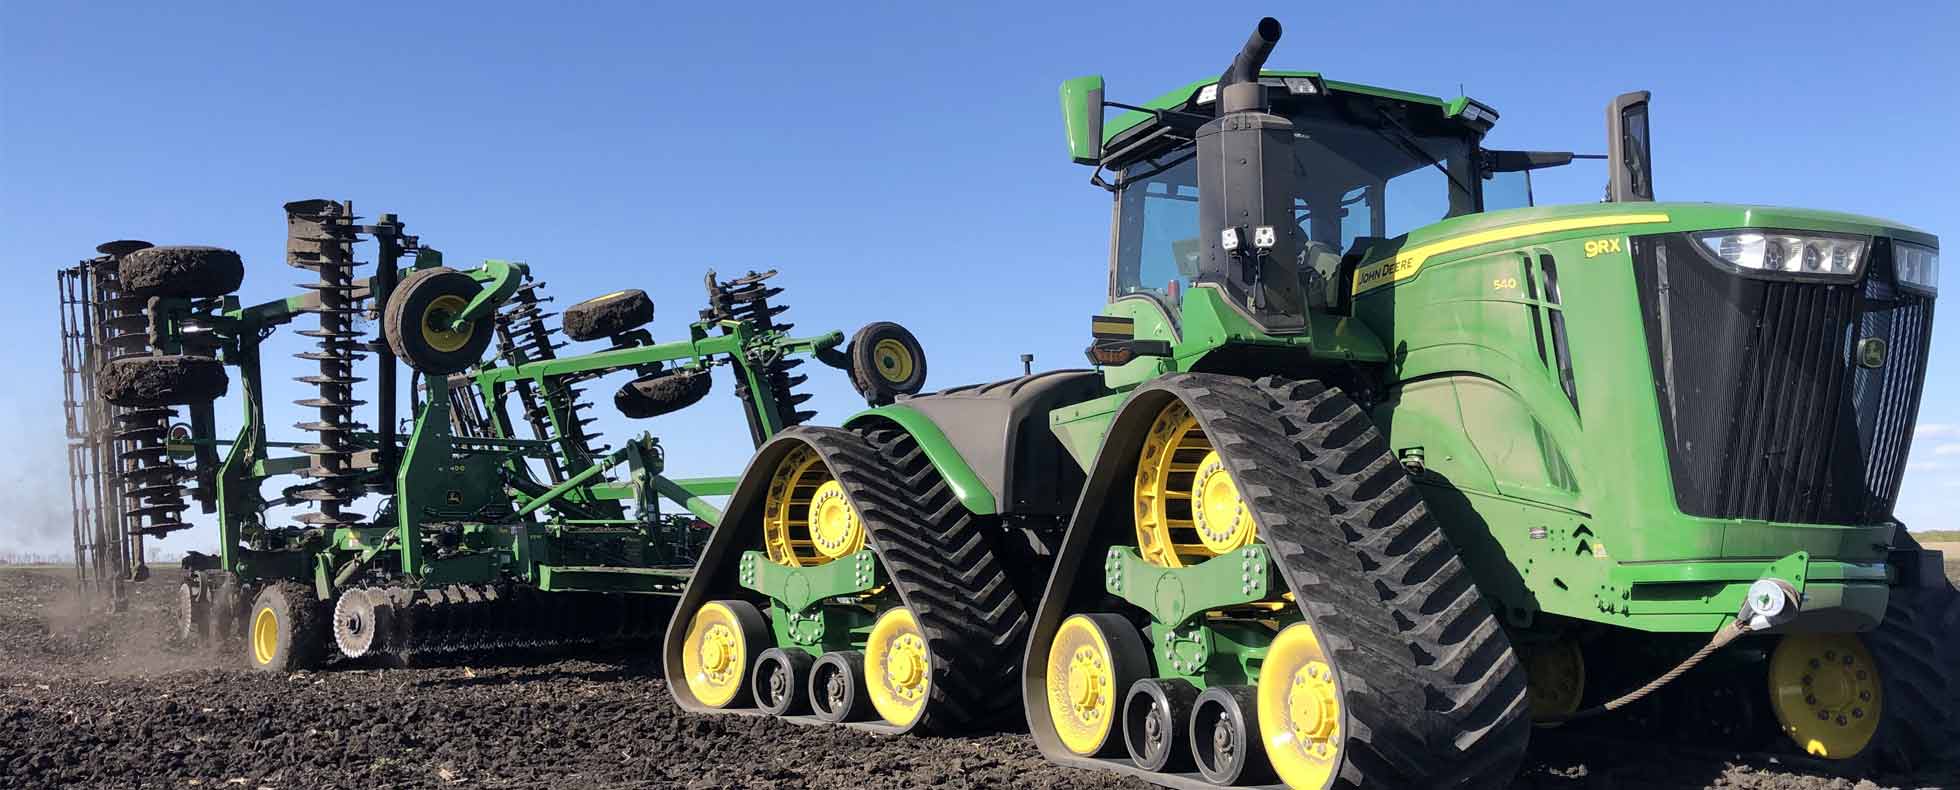 What’s New at the Grand Farm with RDO Equipment Co.